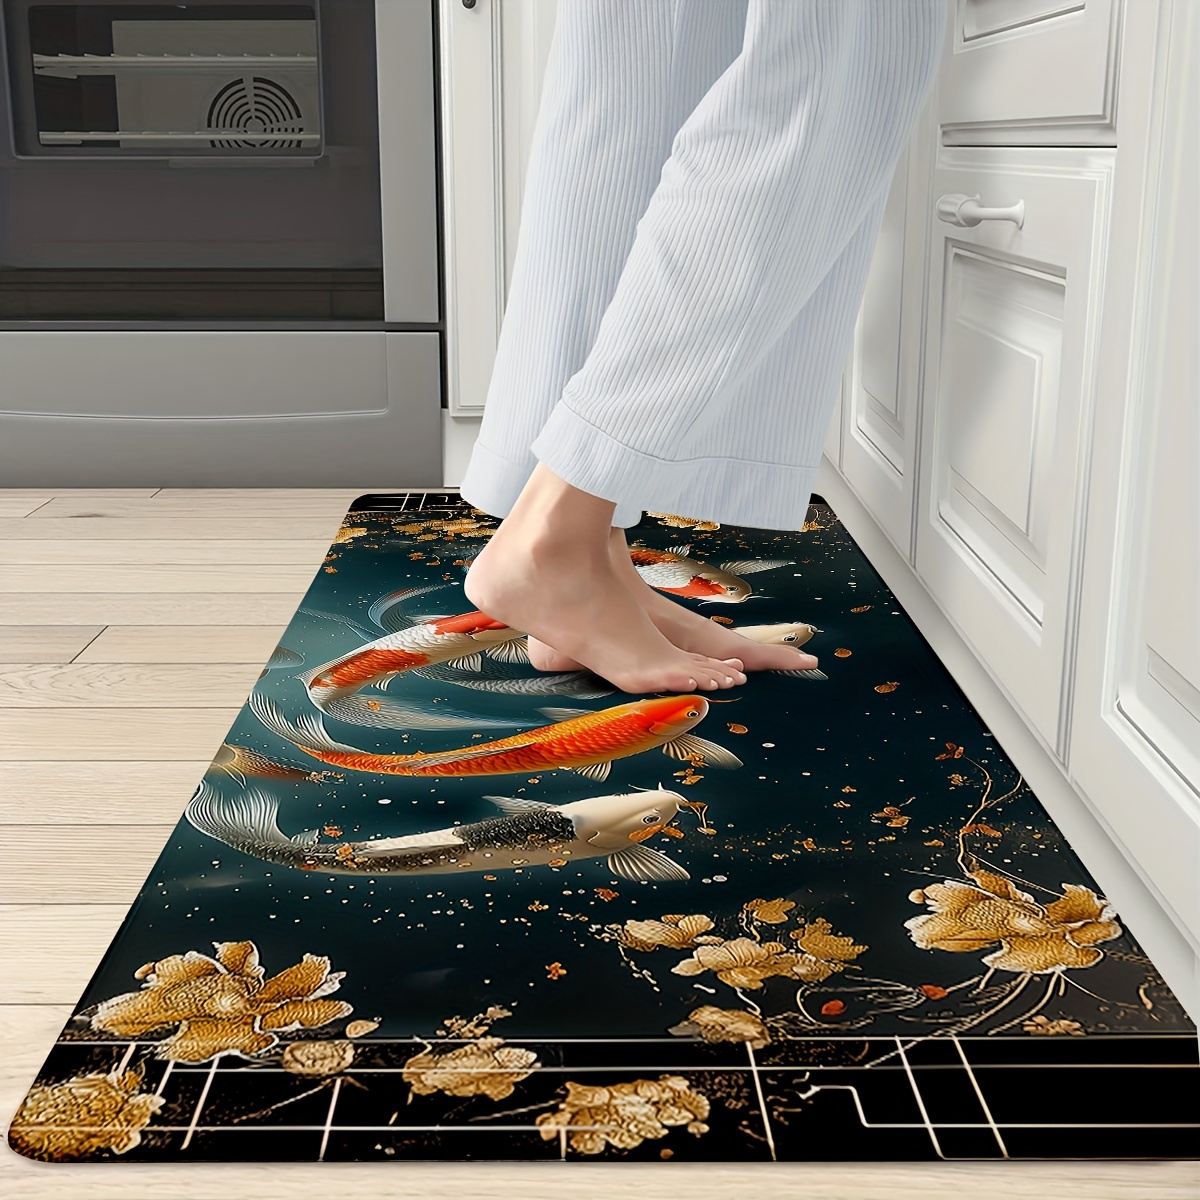 

1pc/2pcs, Fish Kitchen Mats, Non-slip And Durable Bathroom Pads For Floor, Comfortable Standing Runner Rugs, Carpets For Kitchen, Home, Office, Laundry Room, Bathroom, Spring Decor